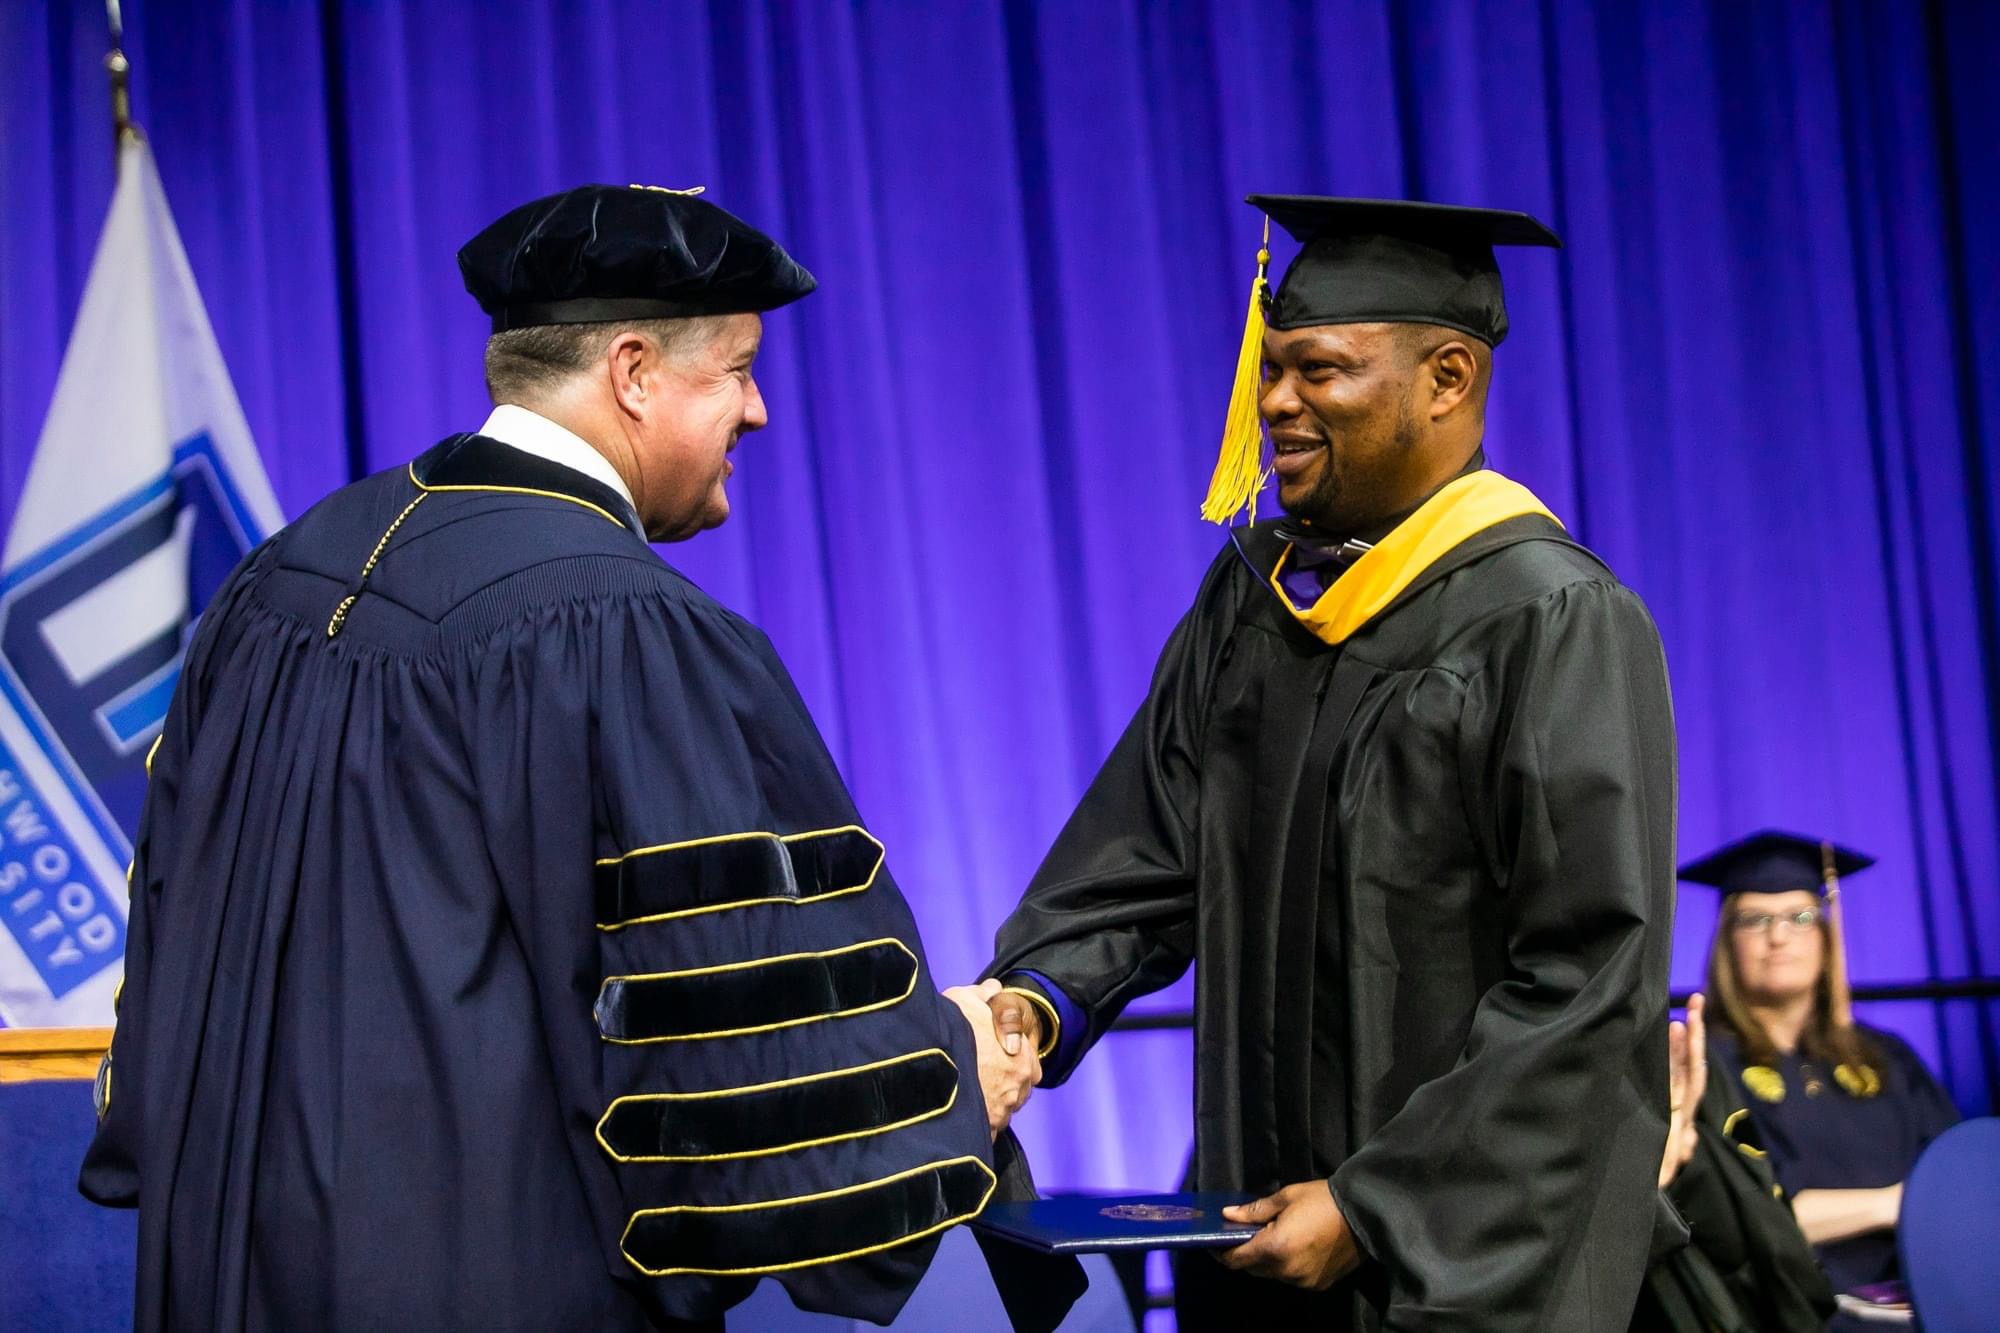 International student shaking hands with the President after receiving his diploma